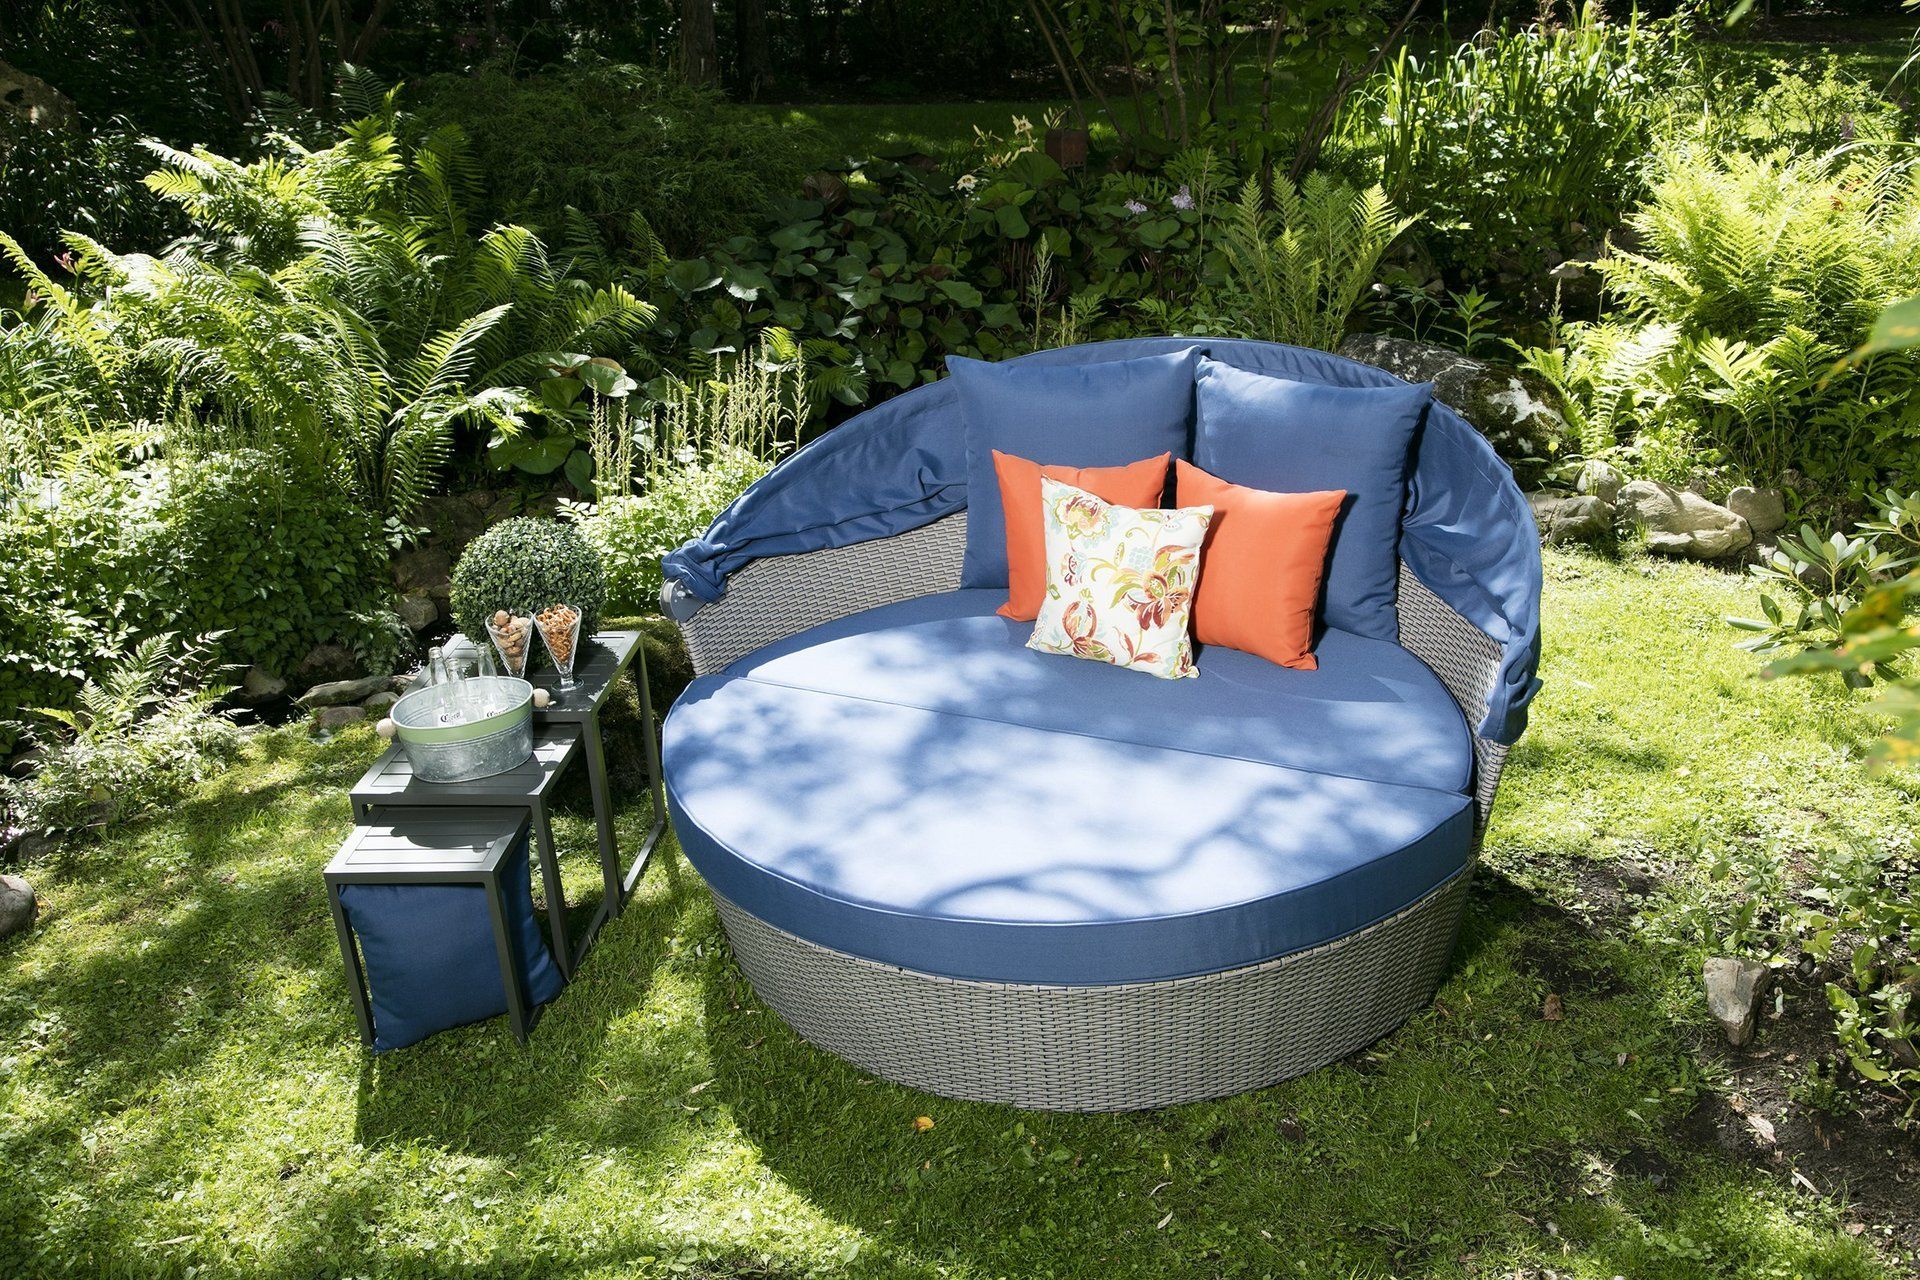 Patio lounging chair